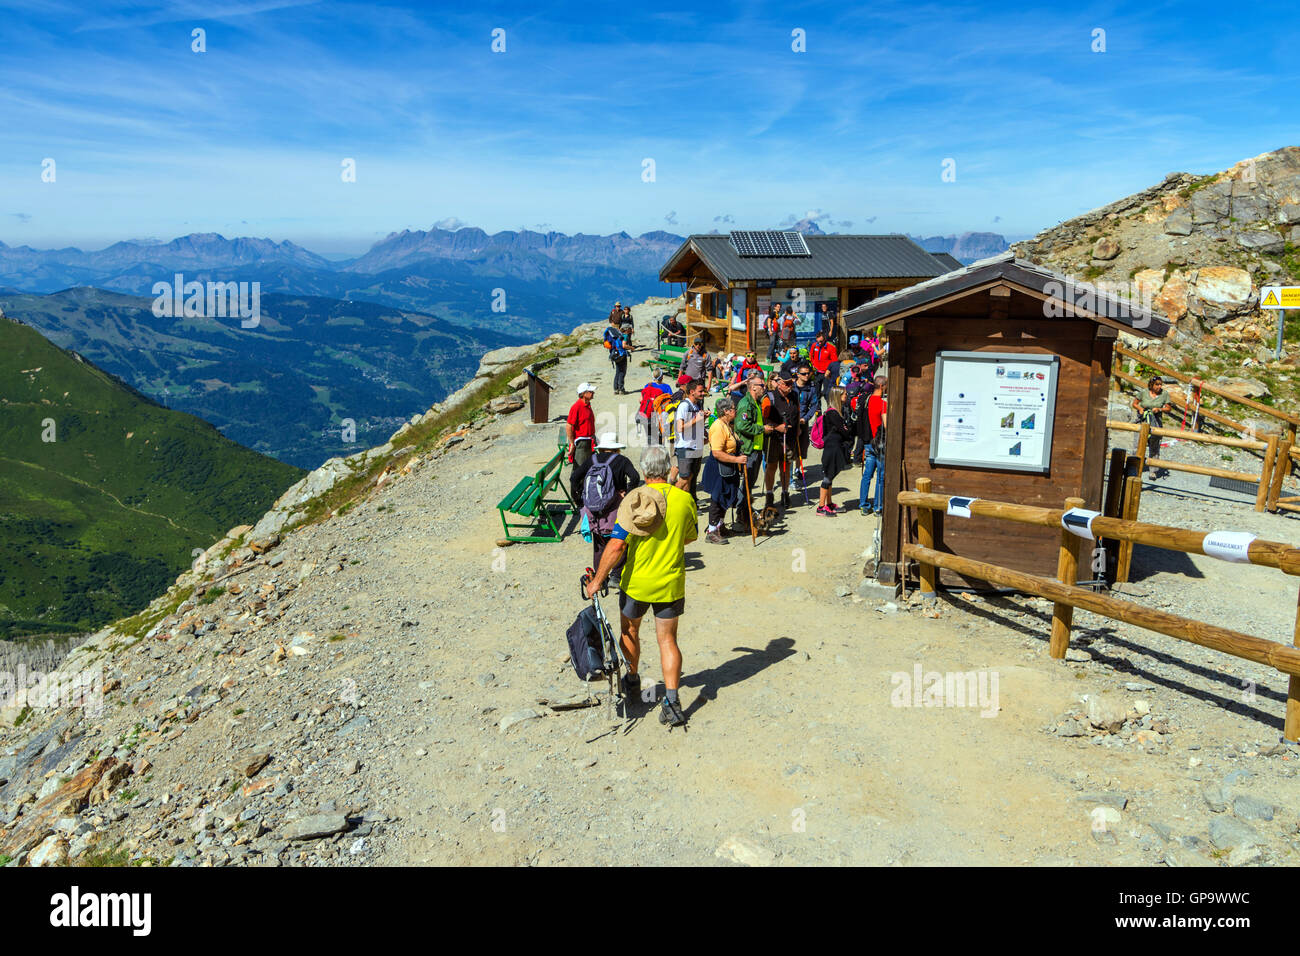 Crowds of hikers, climbers and tourists at the Nid d'AIgle, Mont Blanc Tramway, Chamonix, France Stock Photo